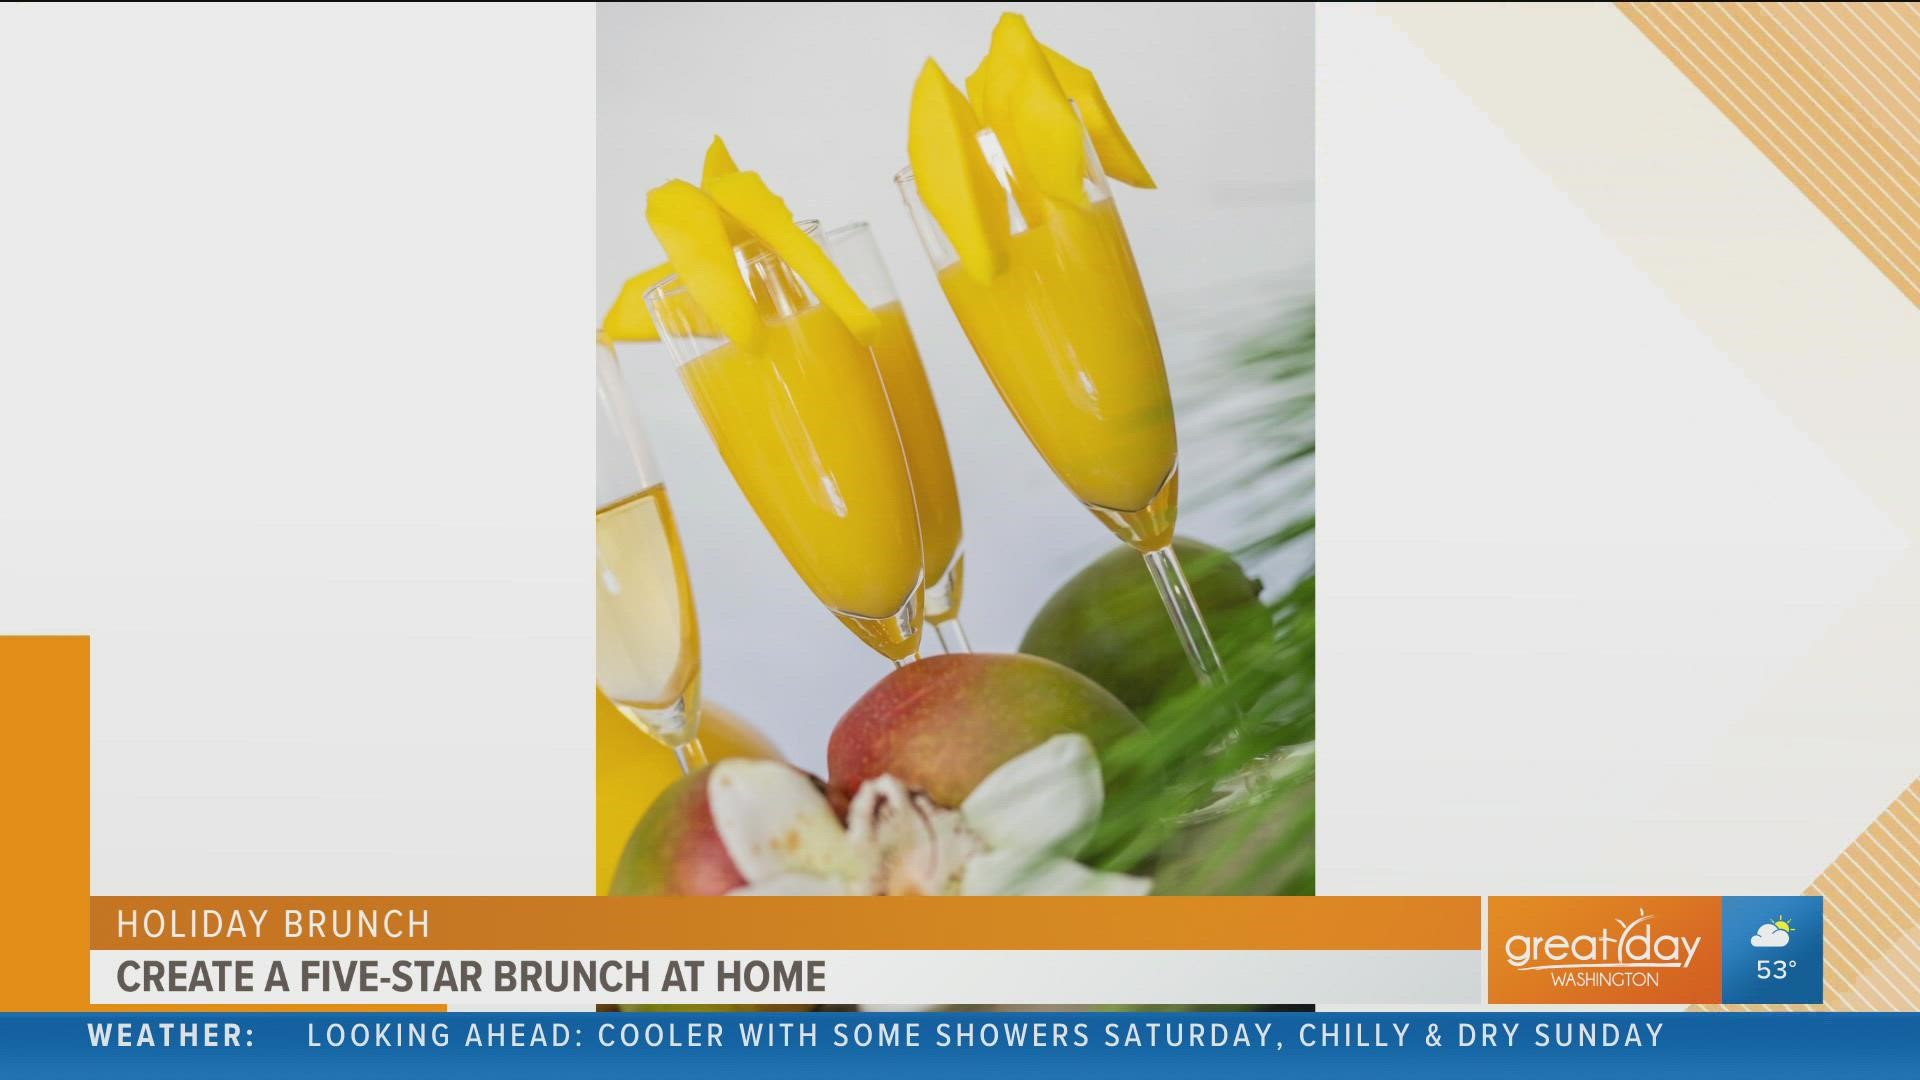 The lavish Sunday Brunch you can't afford to miss! – Food & Recipes